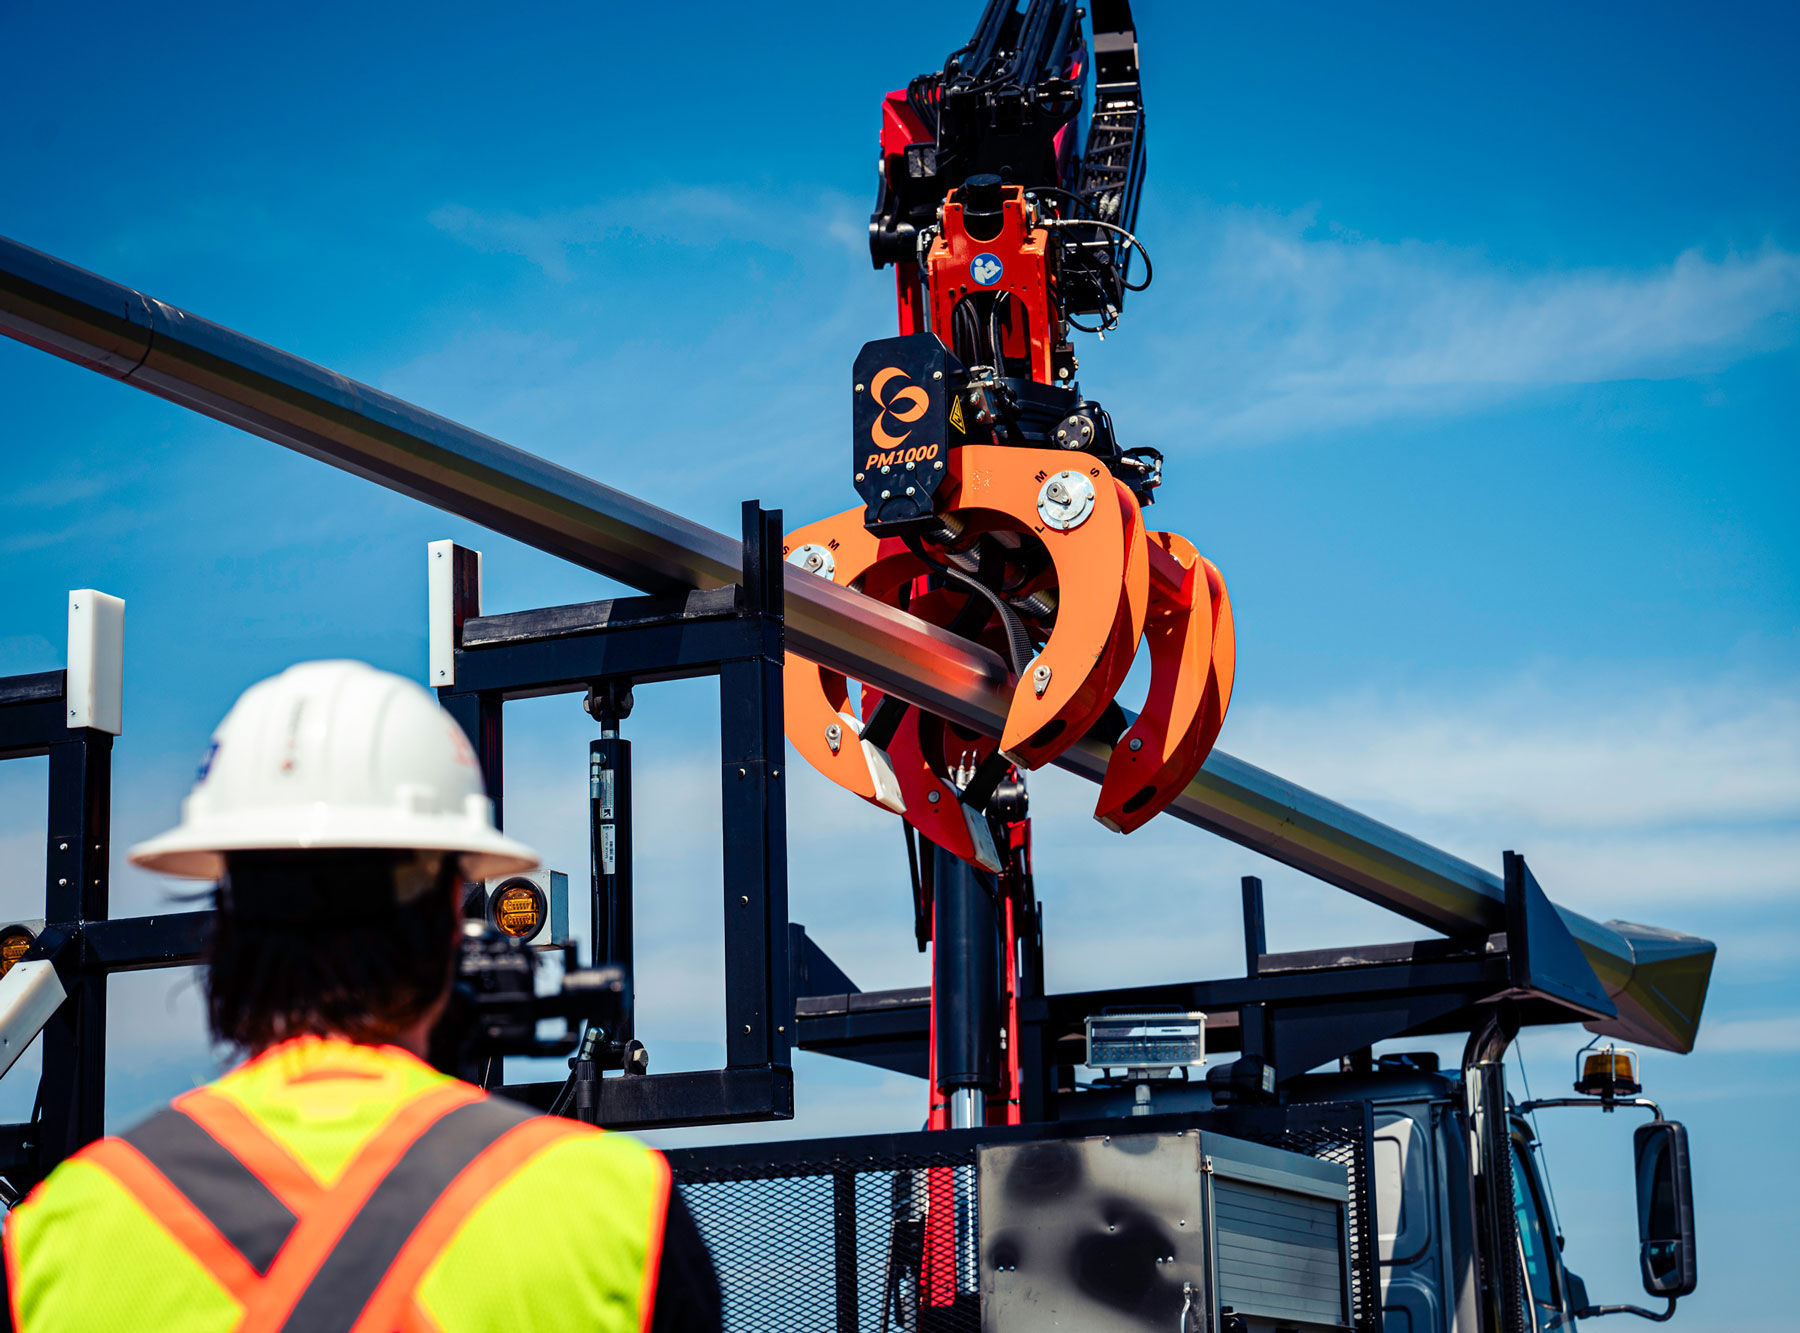 The PM1000™ pole grapple by LaValley Industries is about to grab a pole from a rack. The grapple is attached to a crane truck, and the rack is on the back of the truck. There is an operator in the foreground with their back turned to the camera.